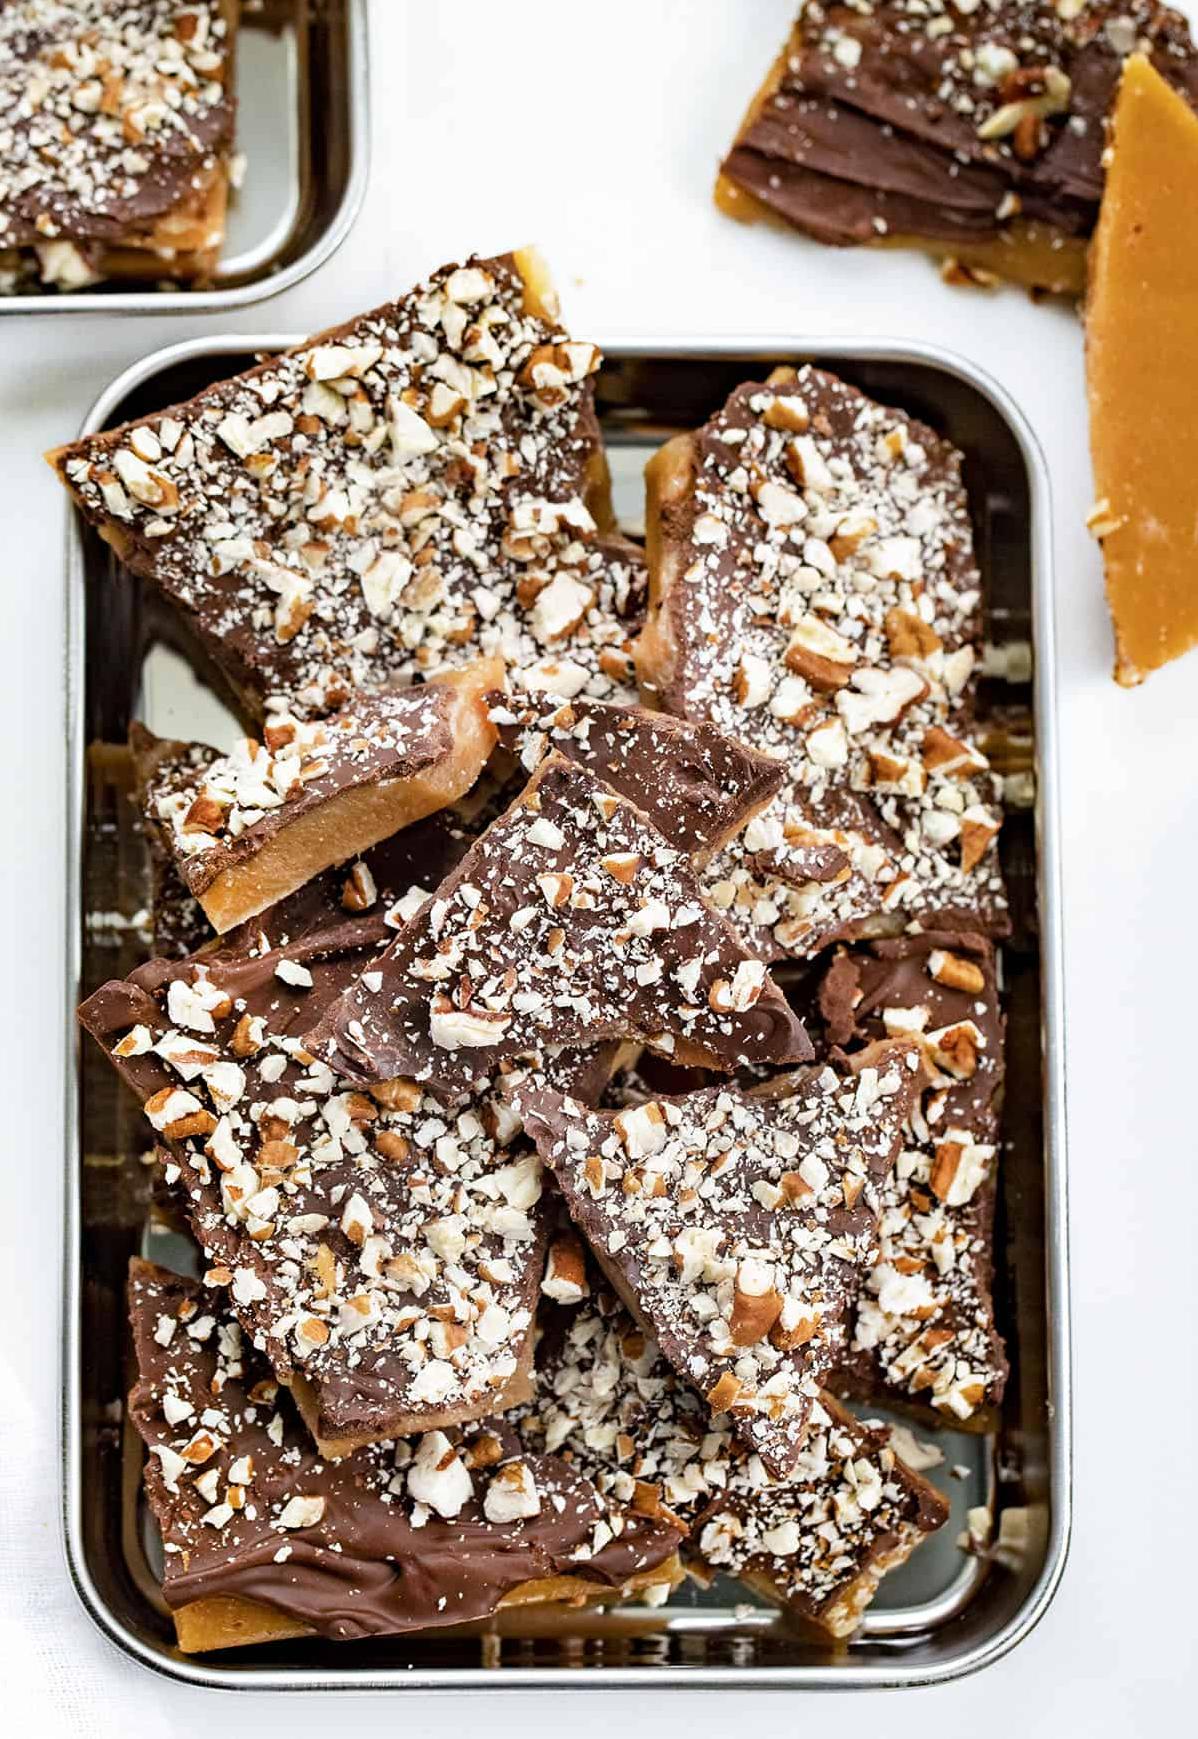  A bite of this toffee takes your taste buds on a decadent journey.